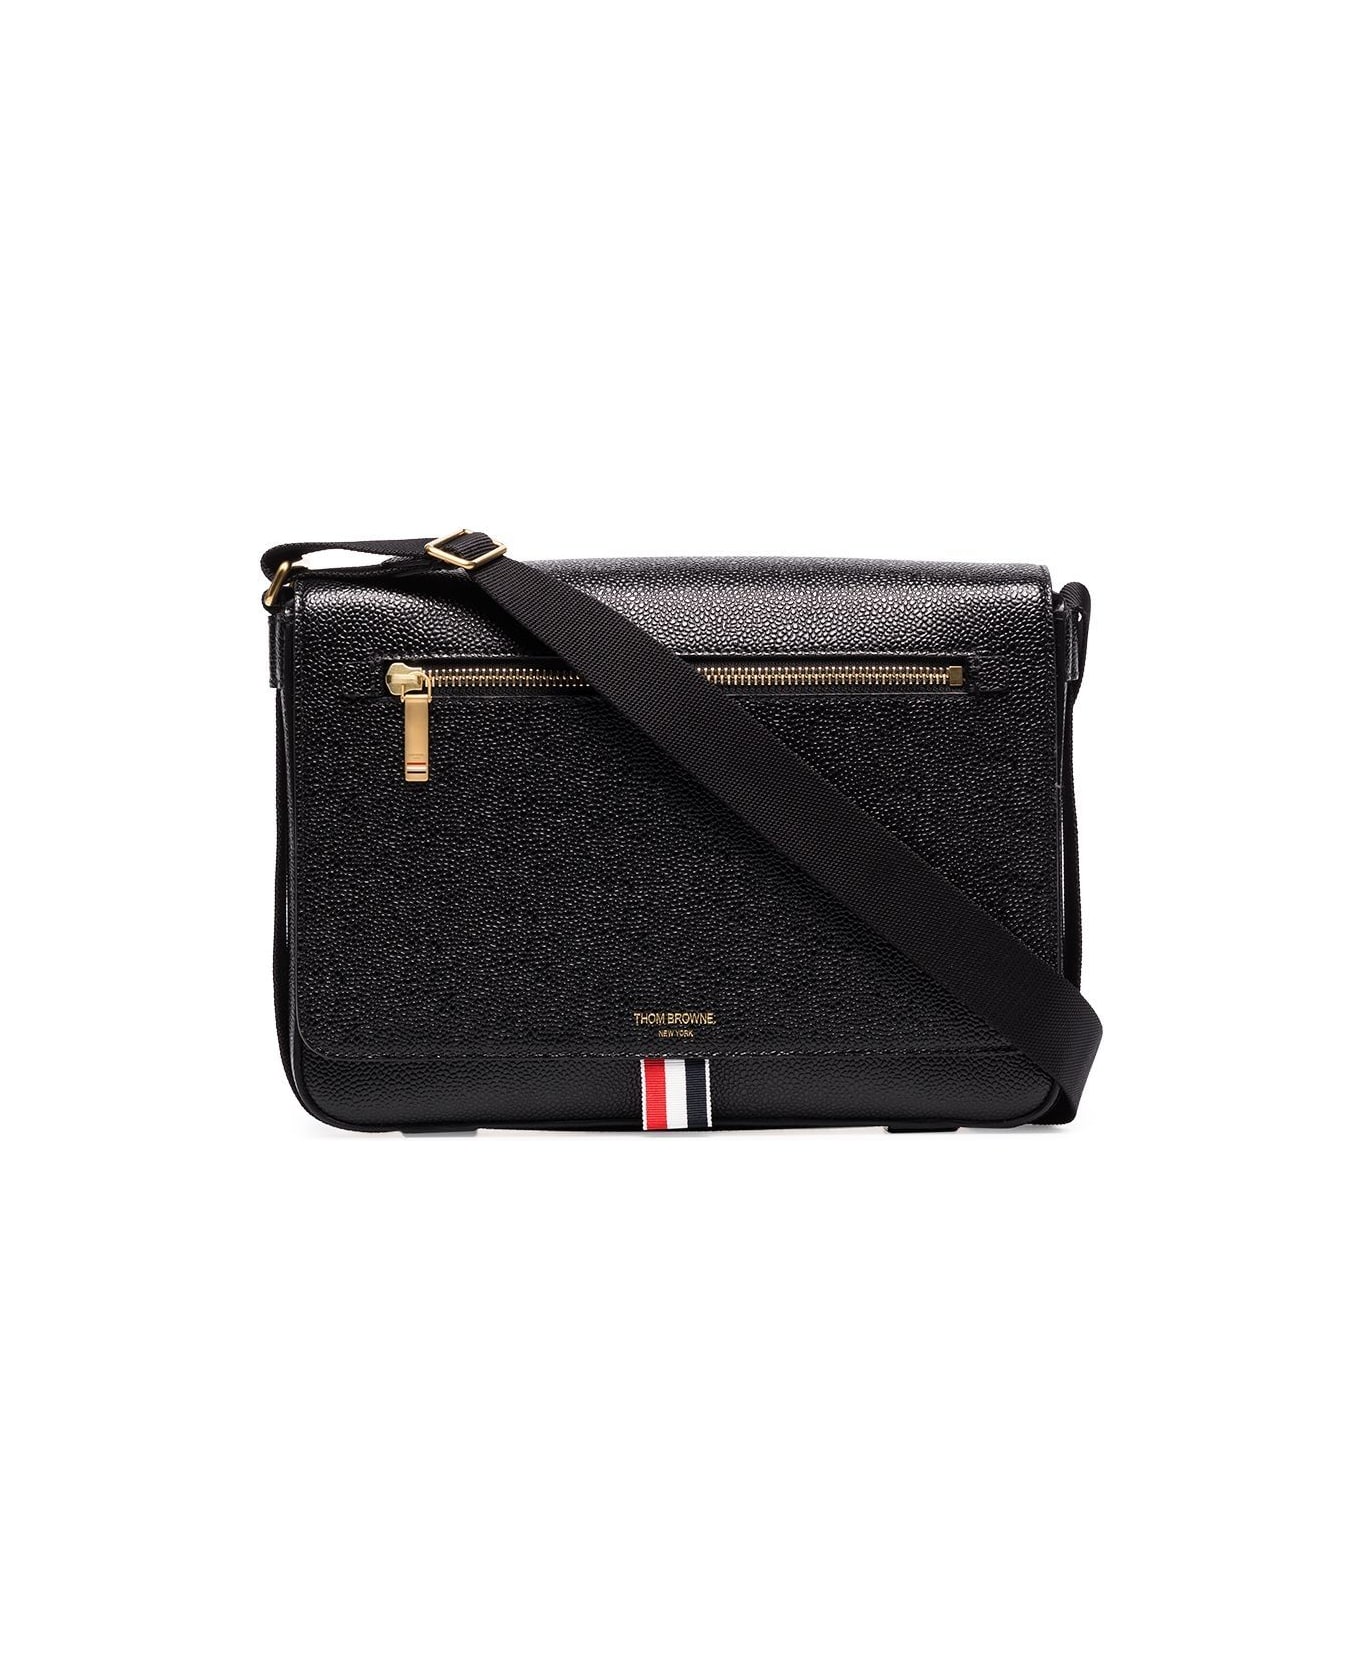 Thom Browne Reporter Bag With Webbing Strap In Pebble Grain